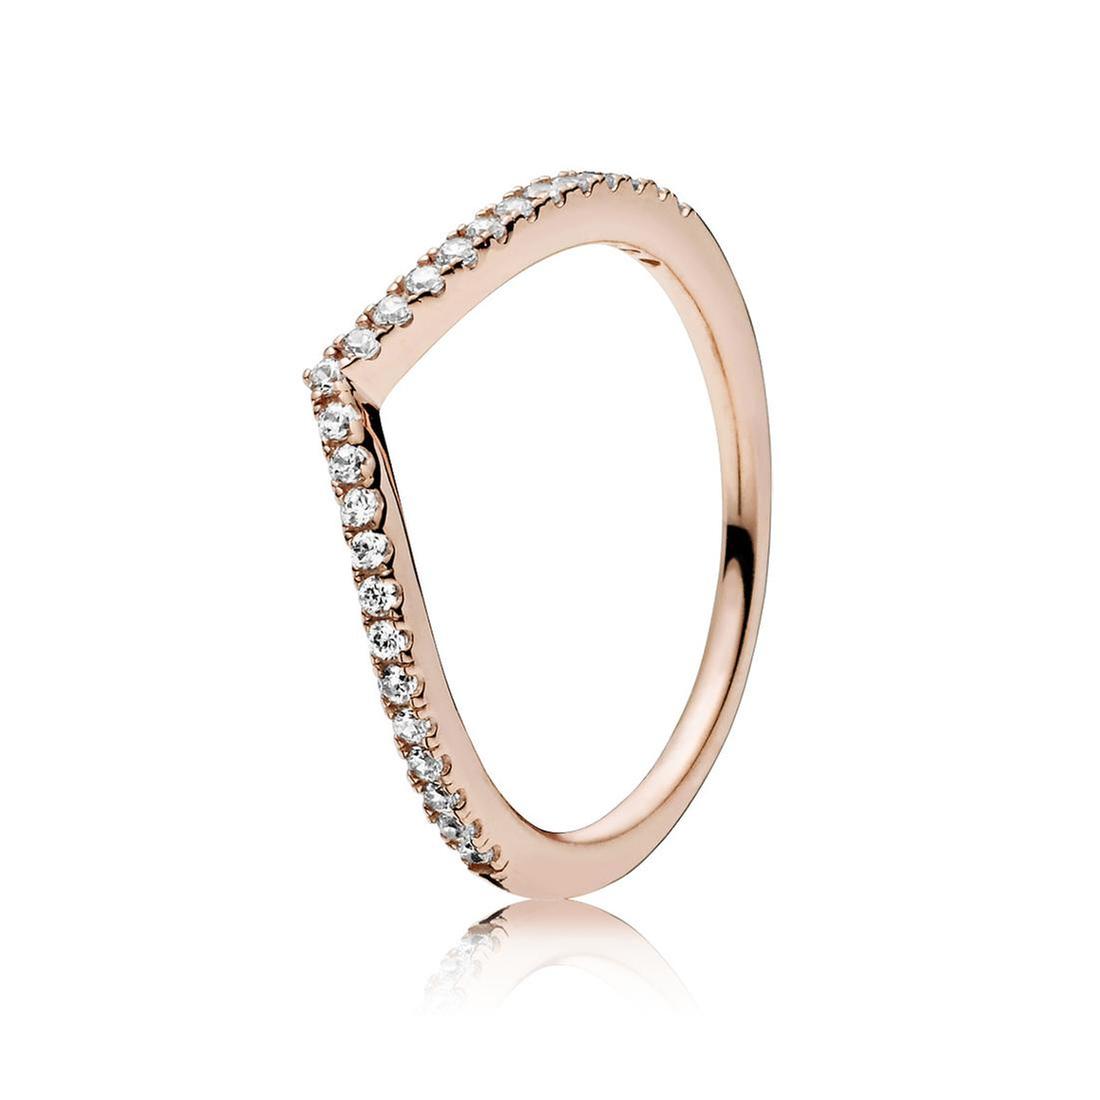 Pandora Shimmering Wish Ring, Clear Cubic Zirconia, Rose Gold-Plated - Size 8.5